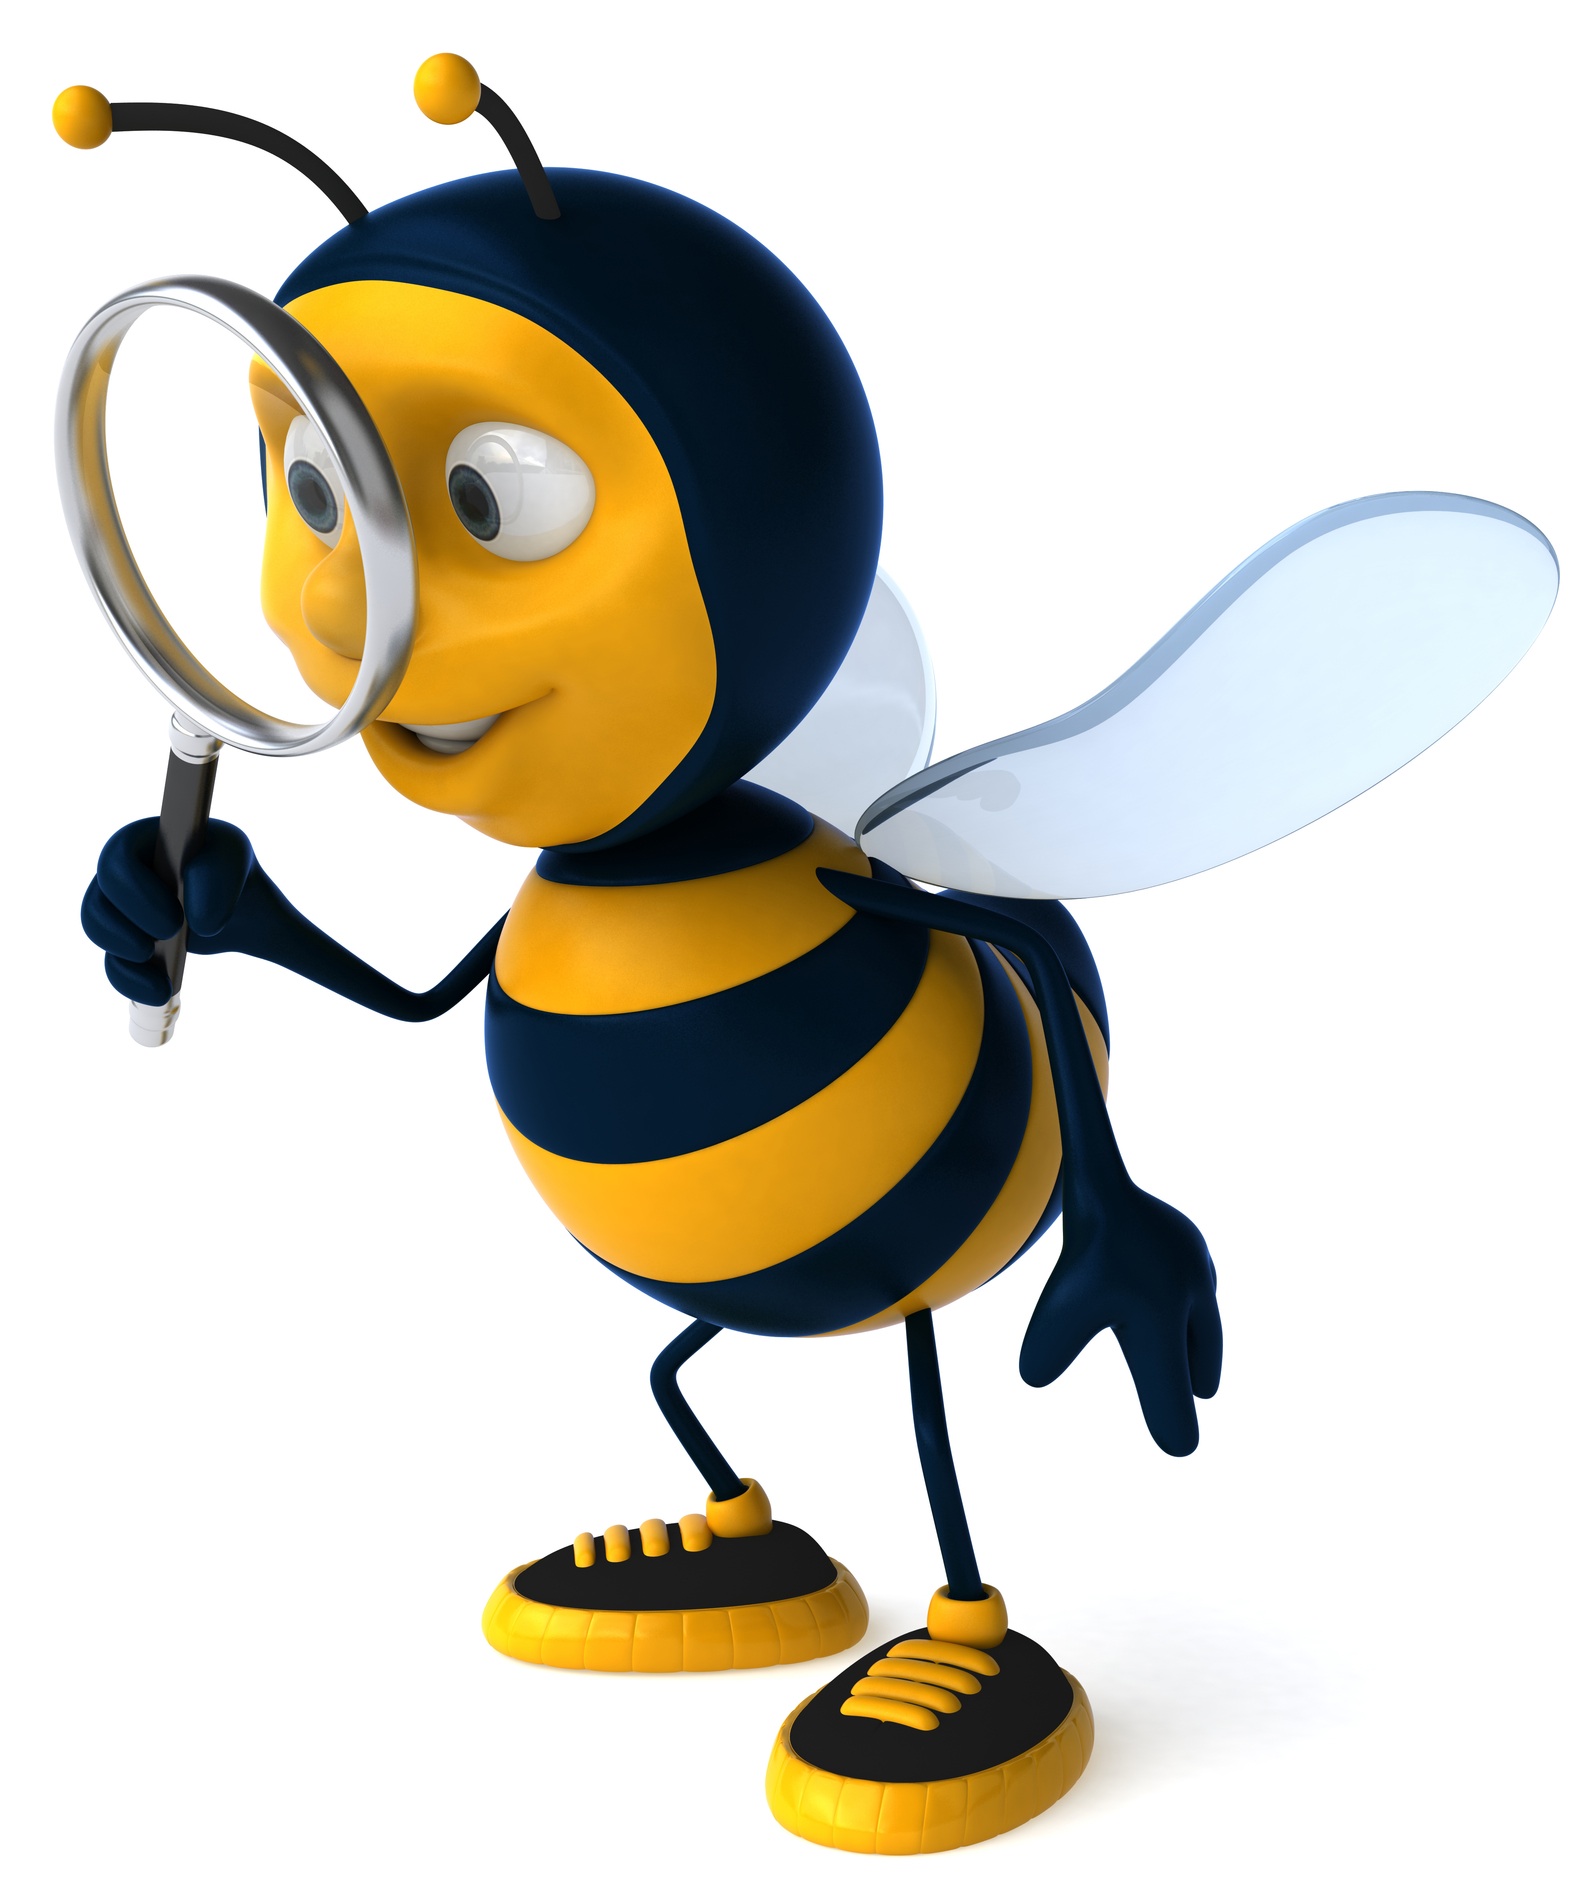 Bumble Bee Cartoon Pictures